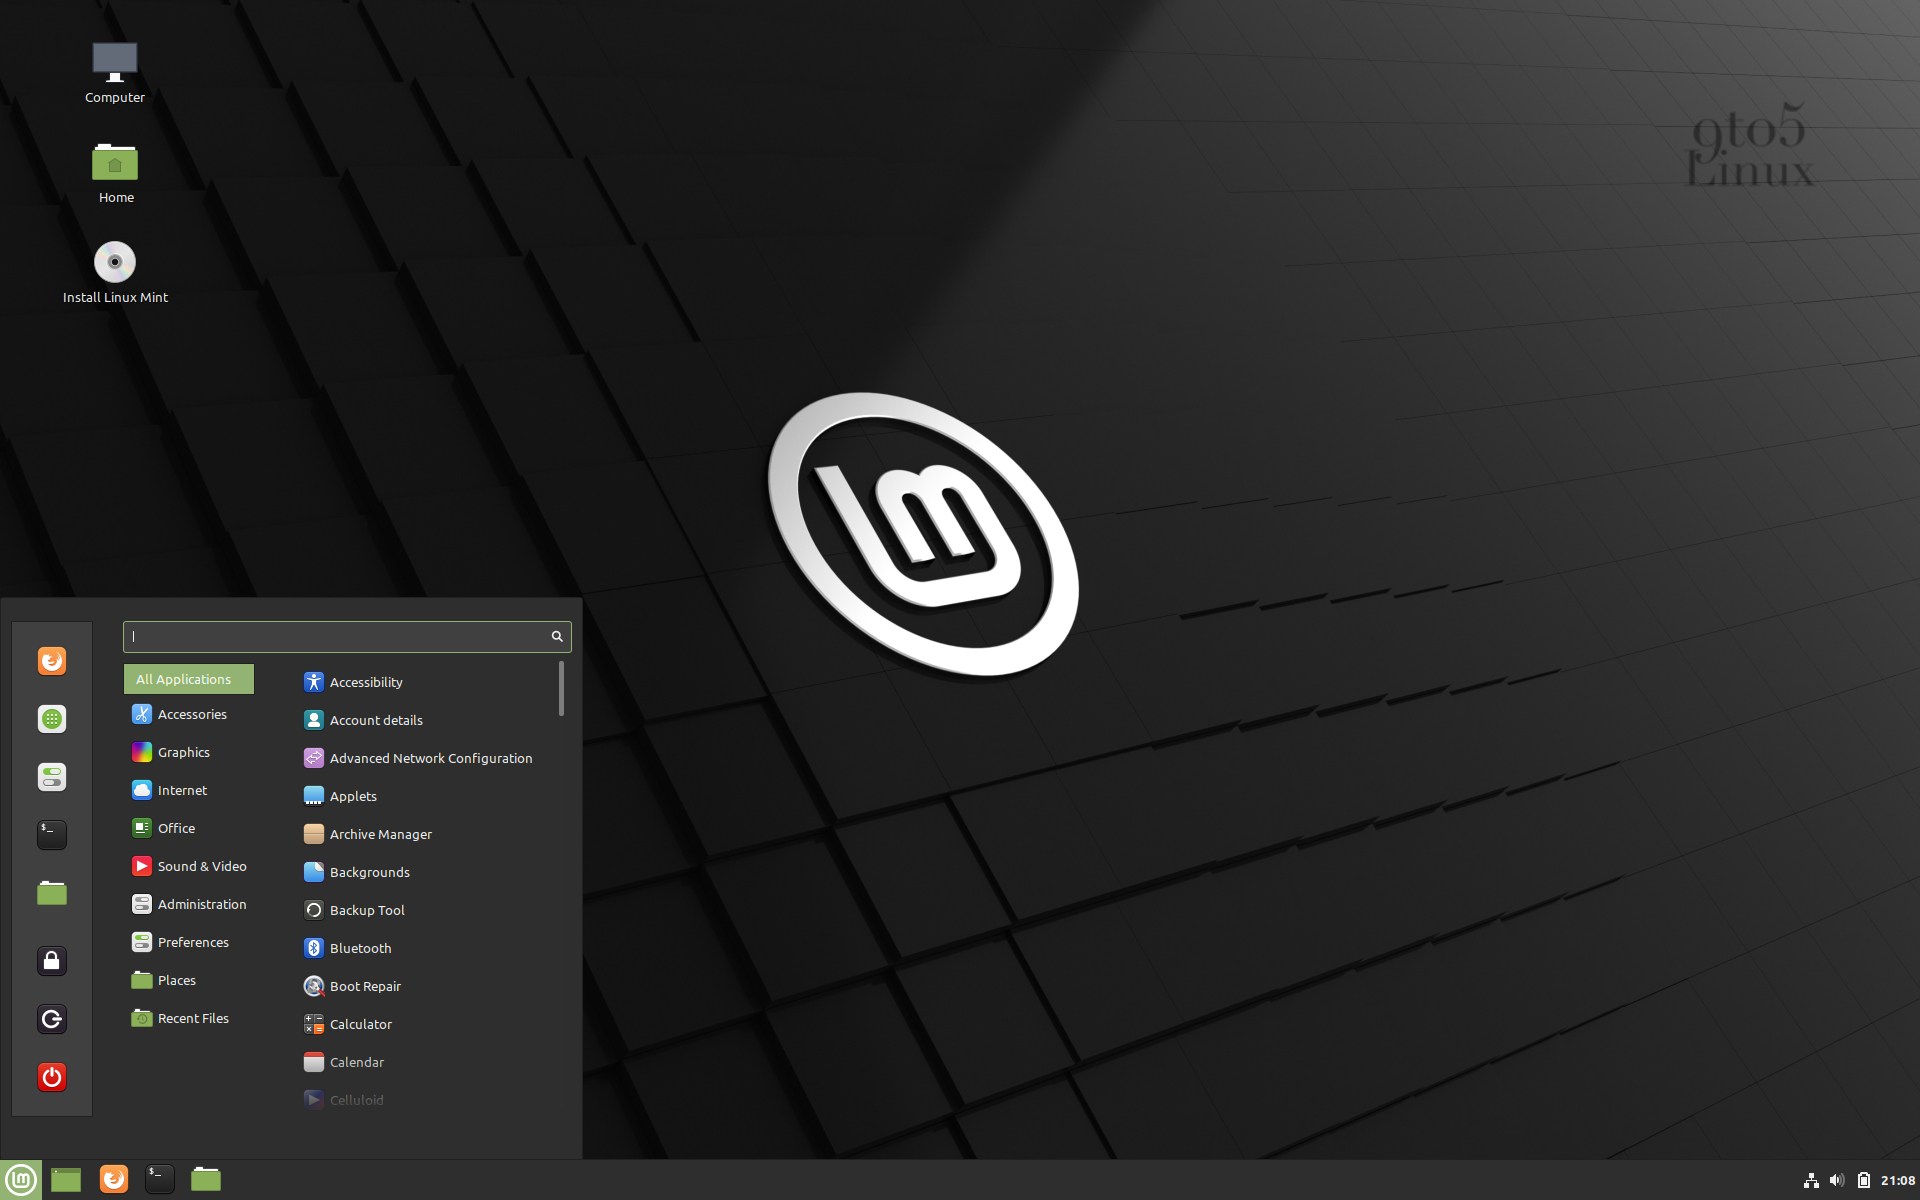 Linux Mint 20.1 Beta Is Now Available for Download